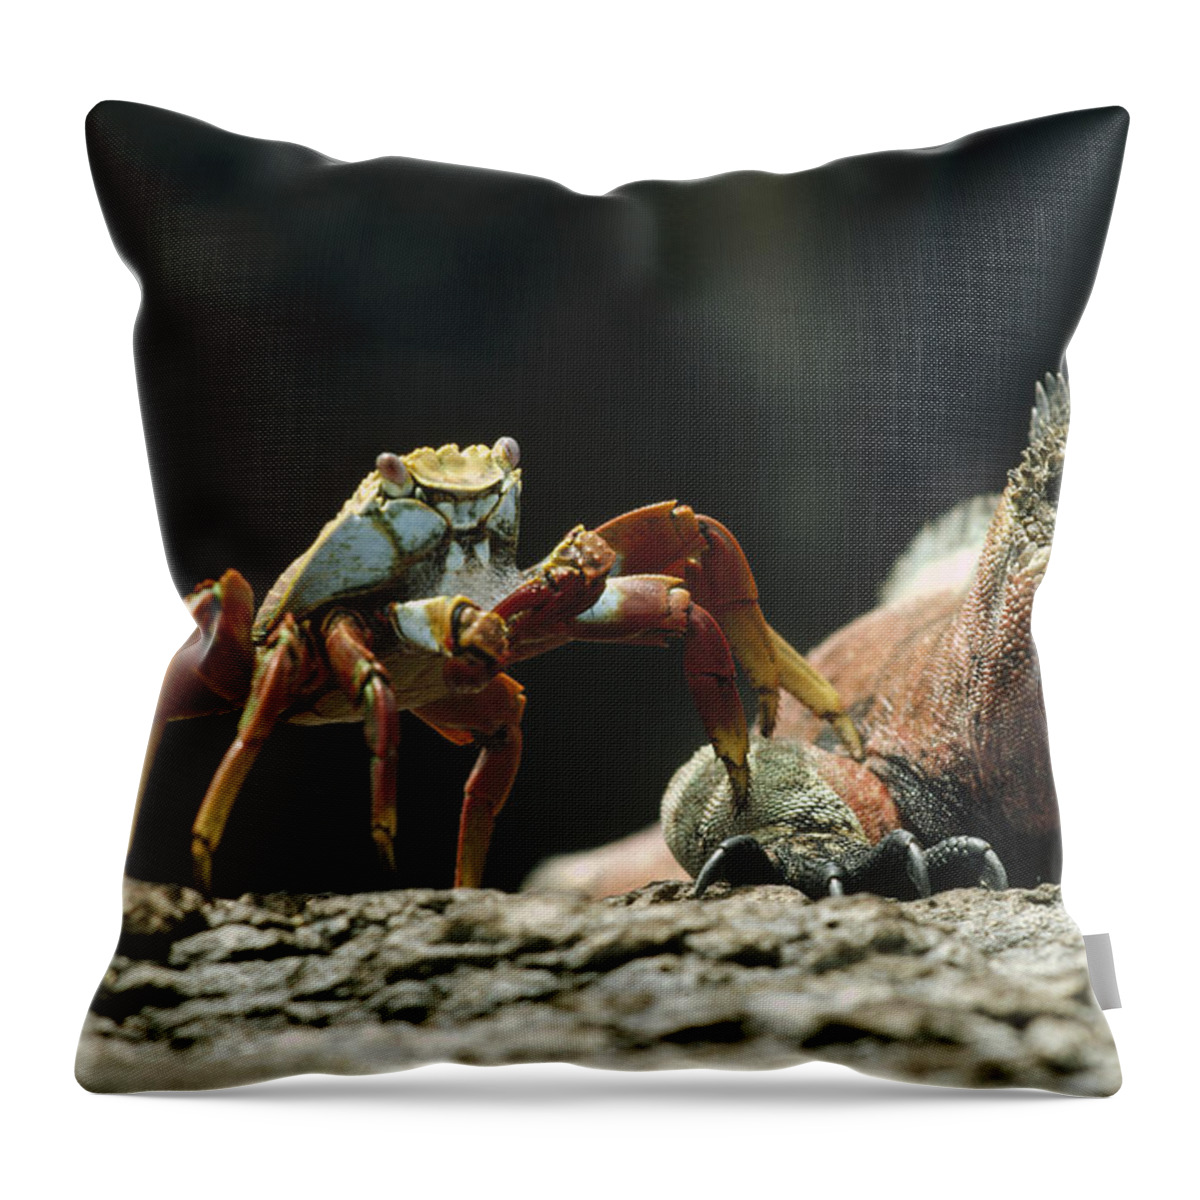 Feb0514 Throw Pillow featuring the photograph Marine Iguana And Sally Lightfoot Crab by Tui De Roy